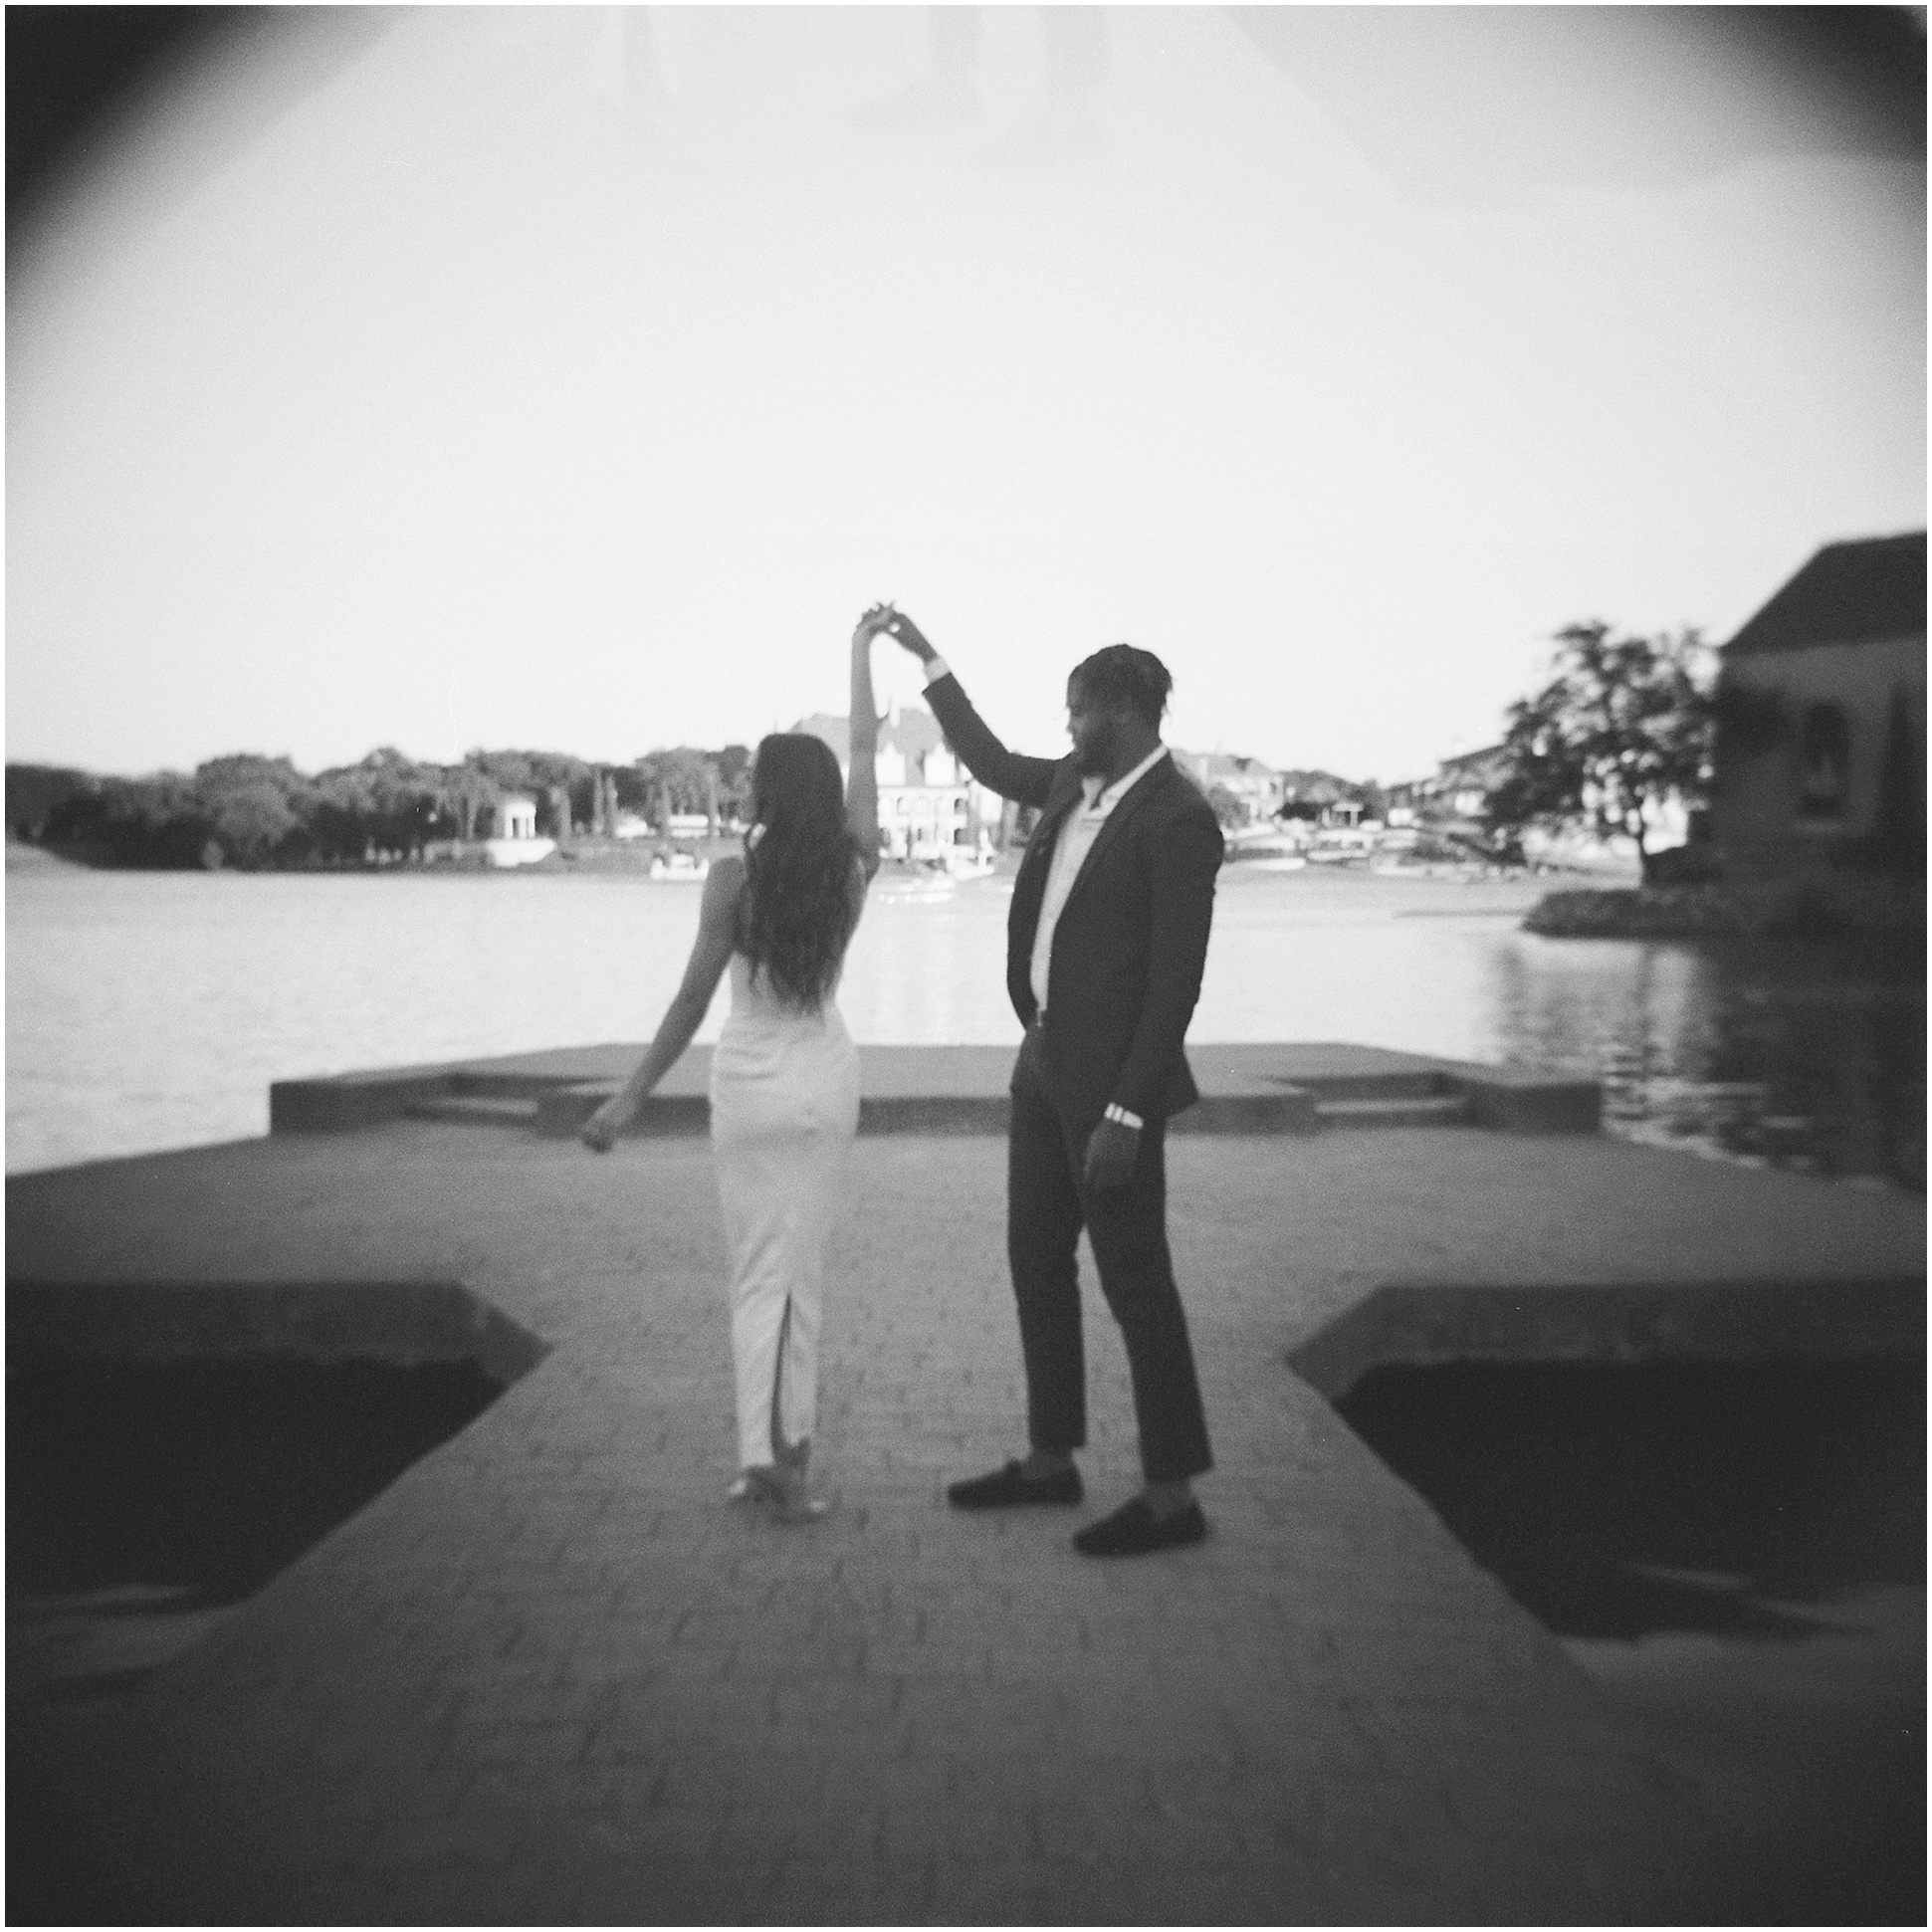 Couple dancing in a romantic pose at adriatica village phot in black and white film image.